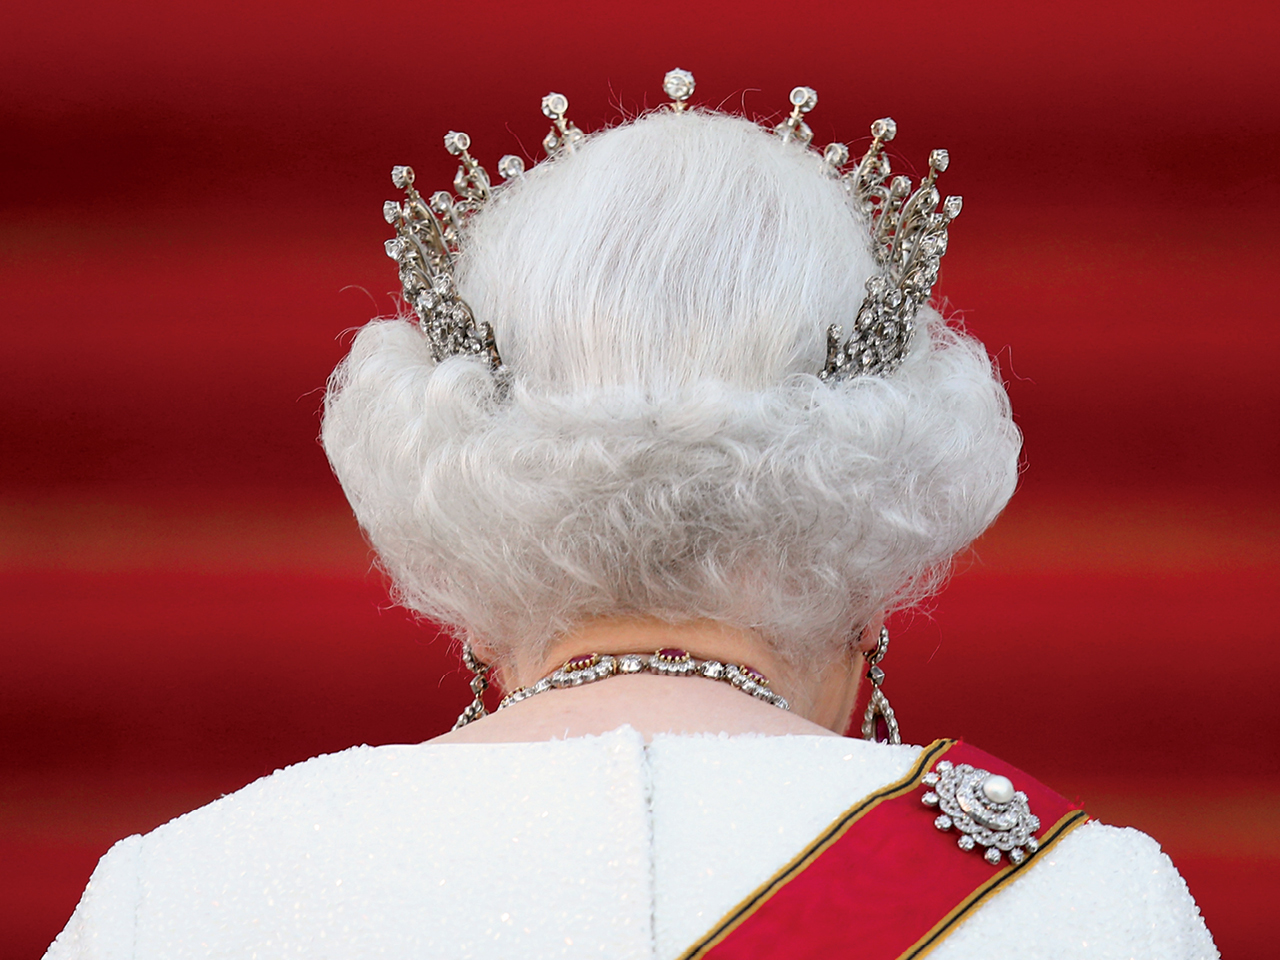 A photo of the back of Queen Elizabeth's head, against a red background